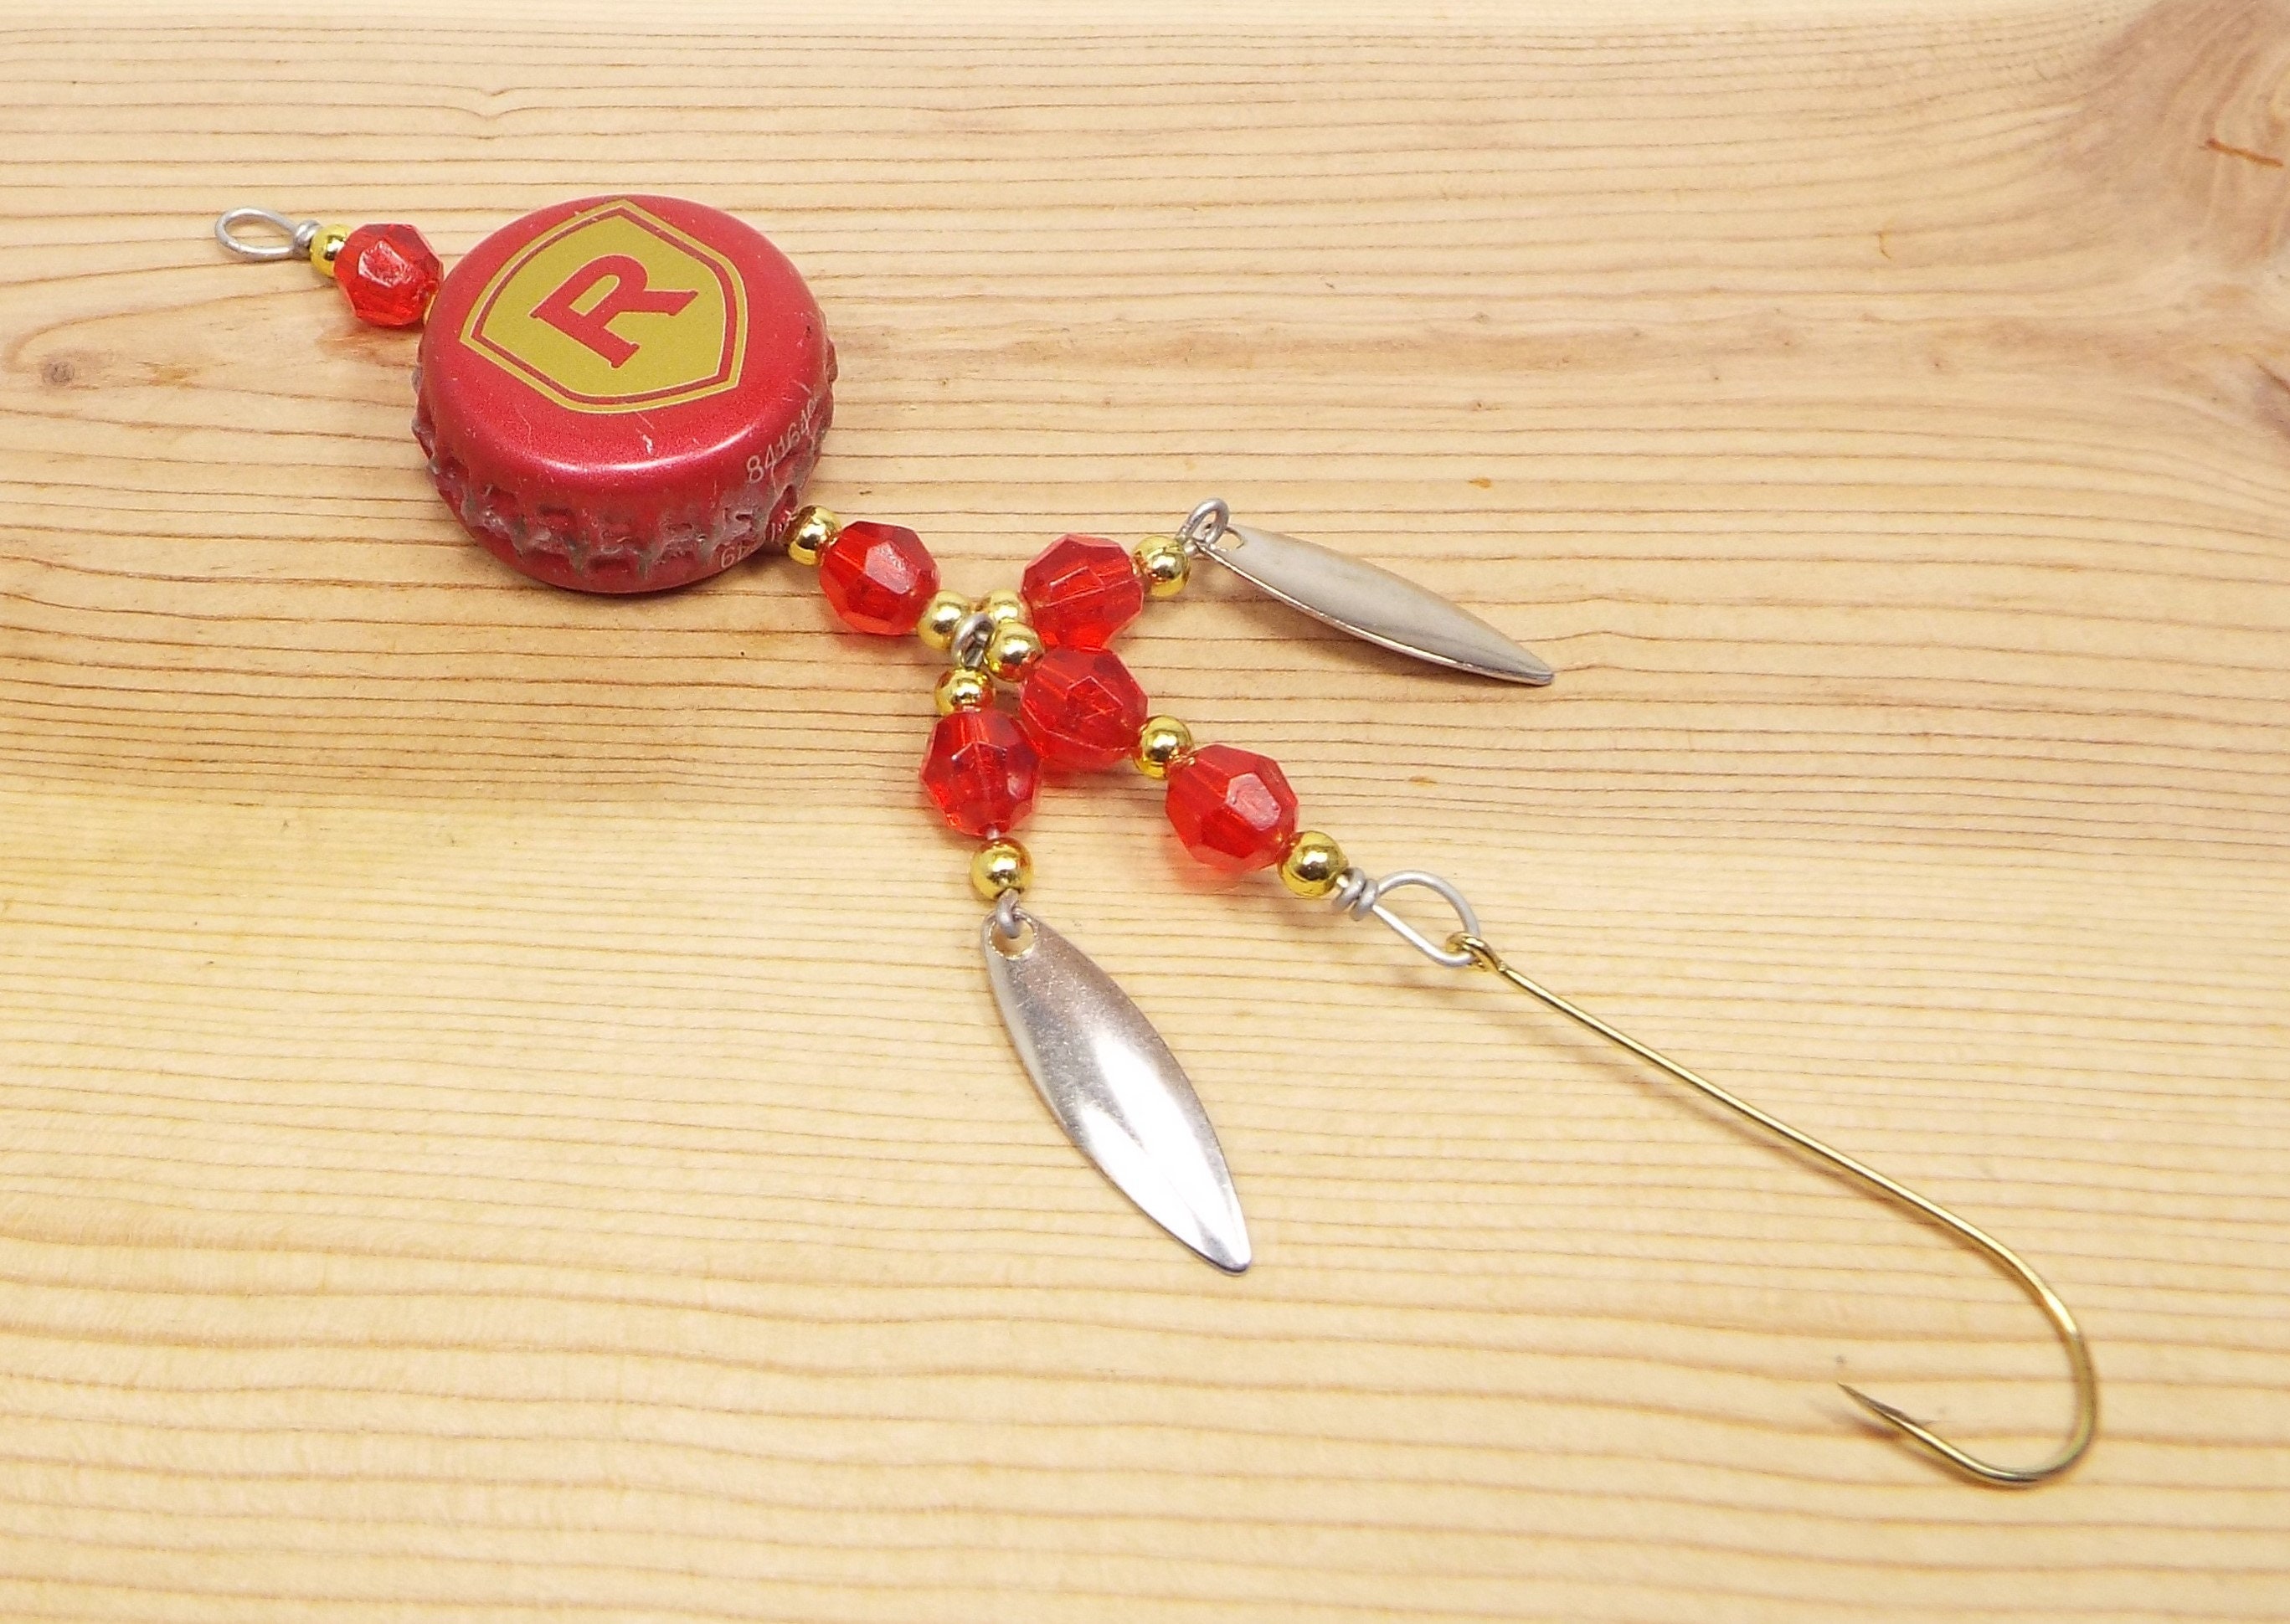 Bottle Cap Fishing Lure, Crafts, Gift, Handcrafted, Novelty Gift